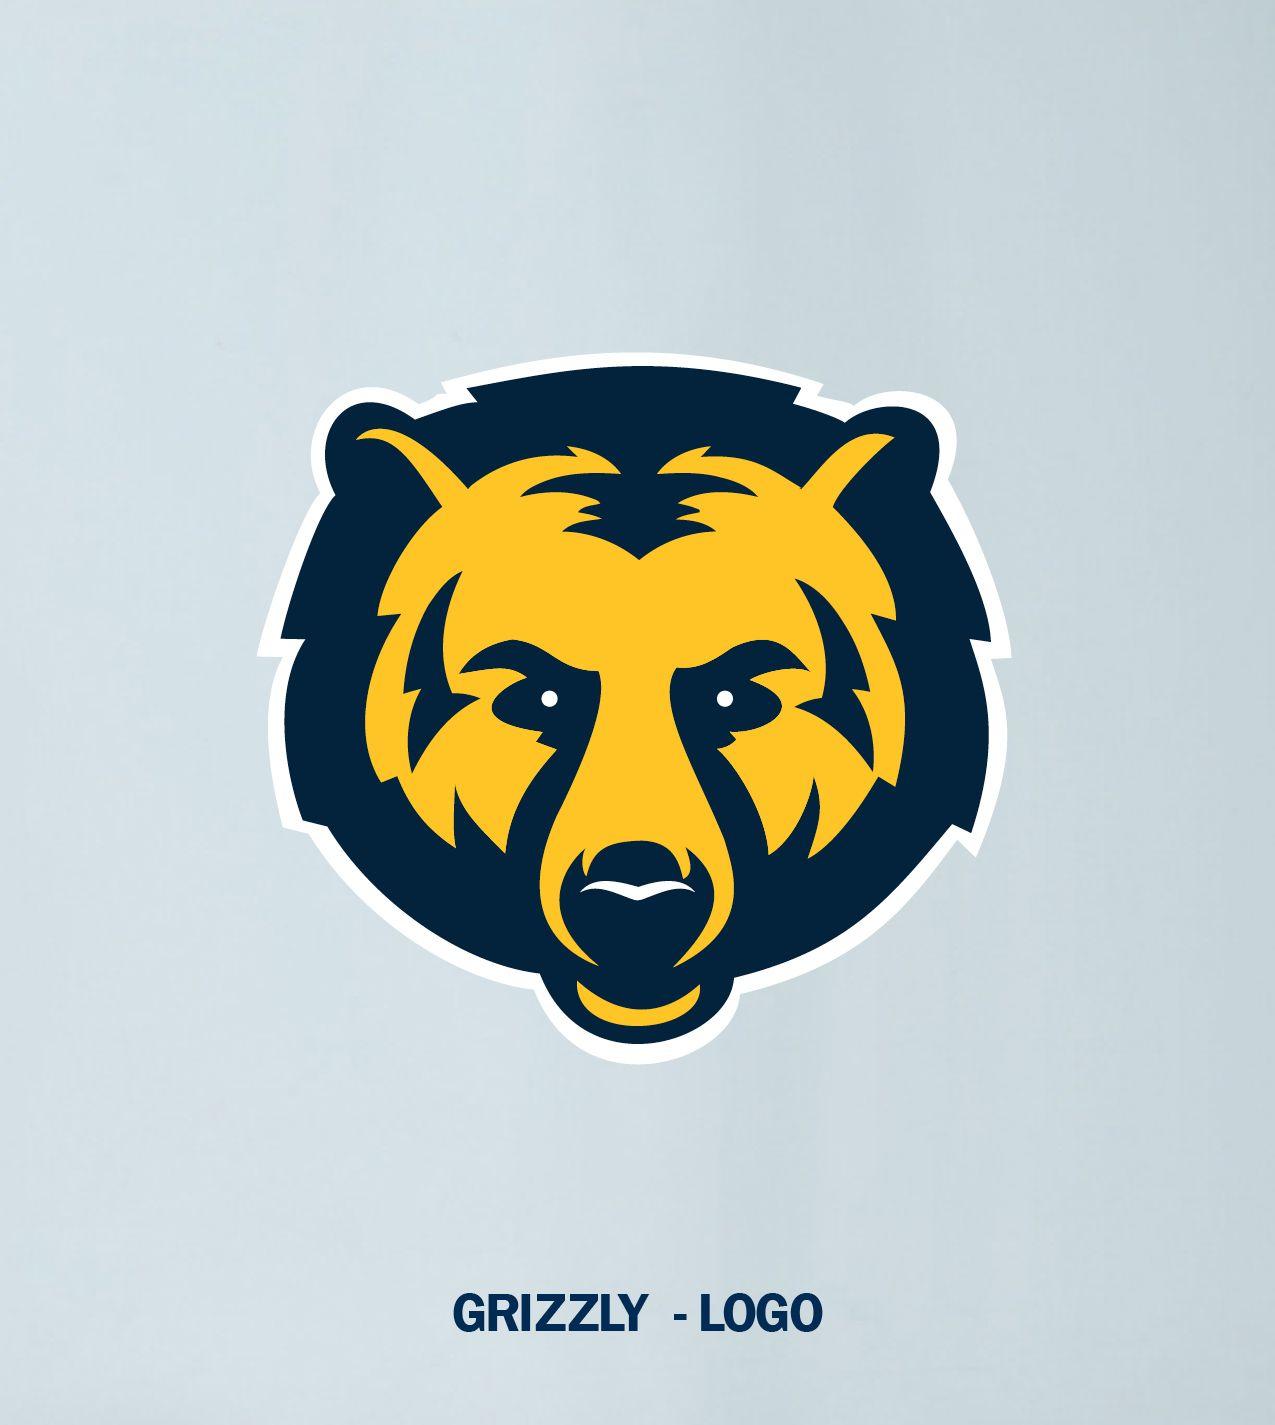 Grizzly Logo - Car Magnet